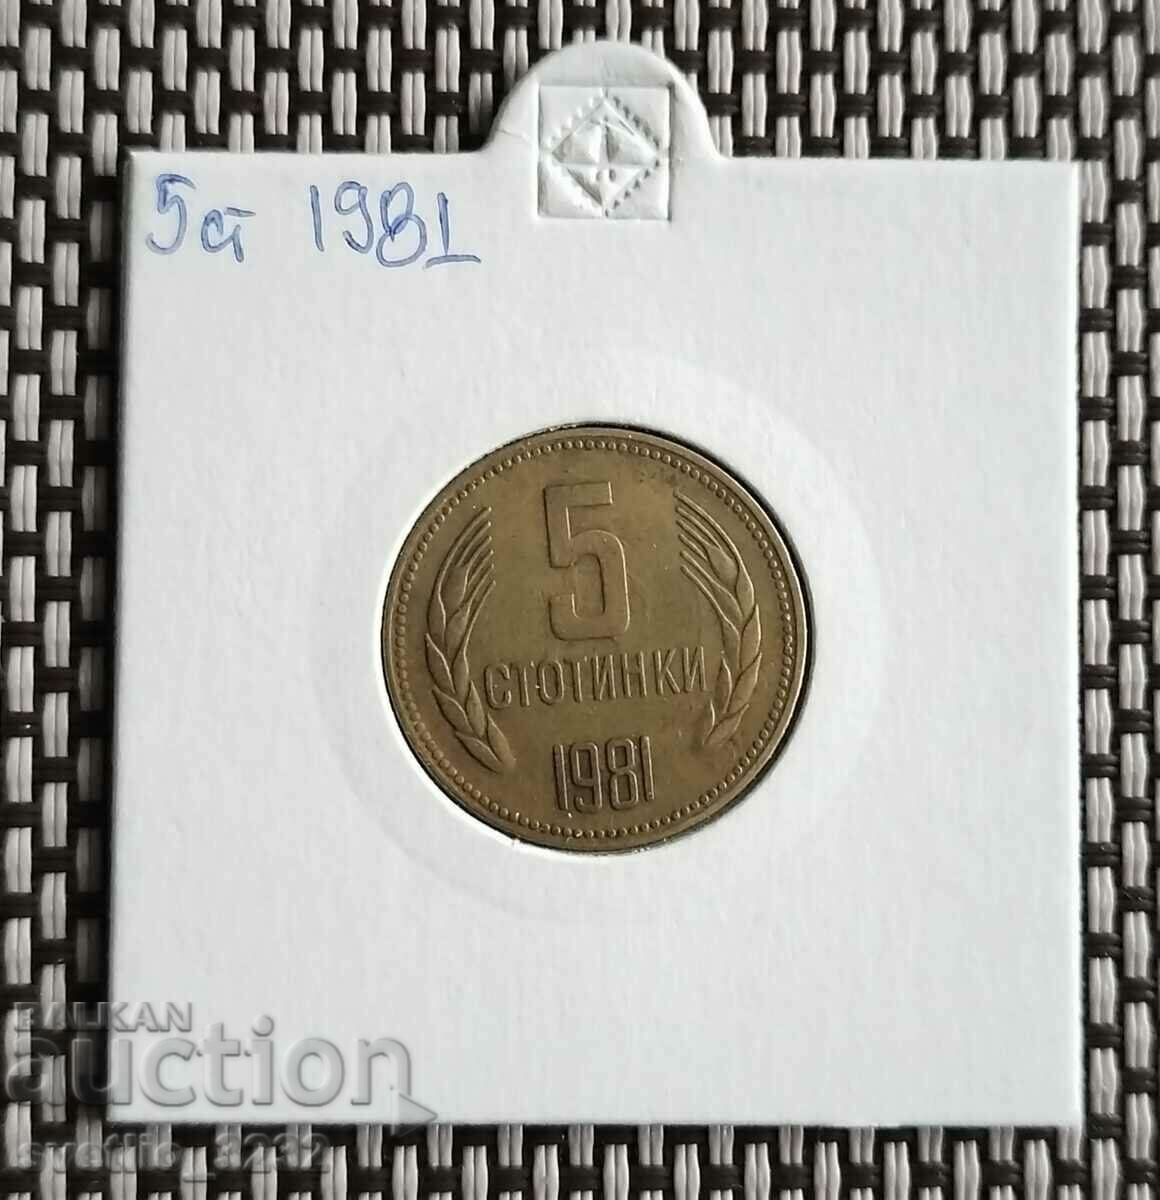 5 cents 1981